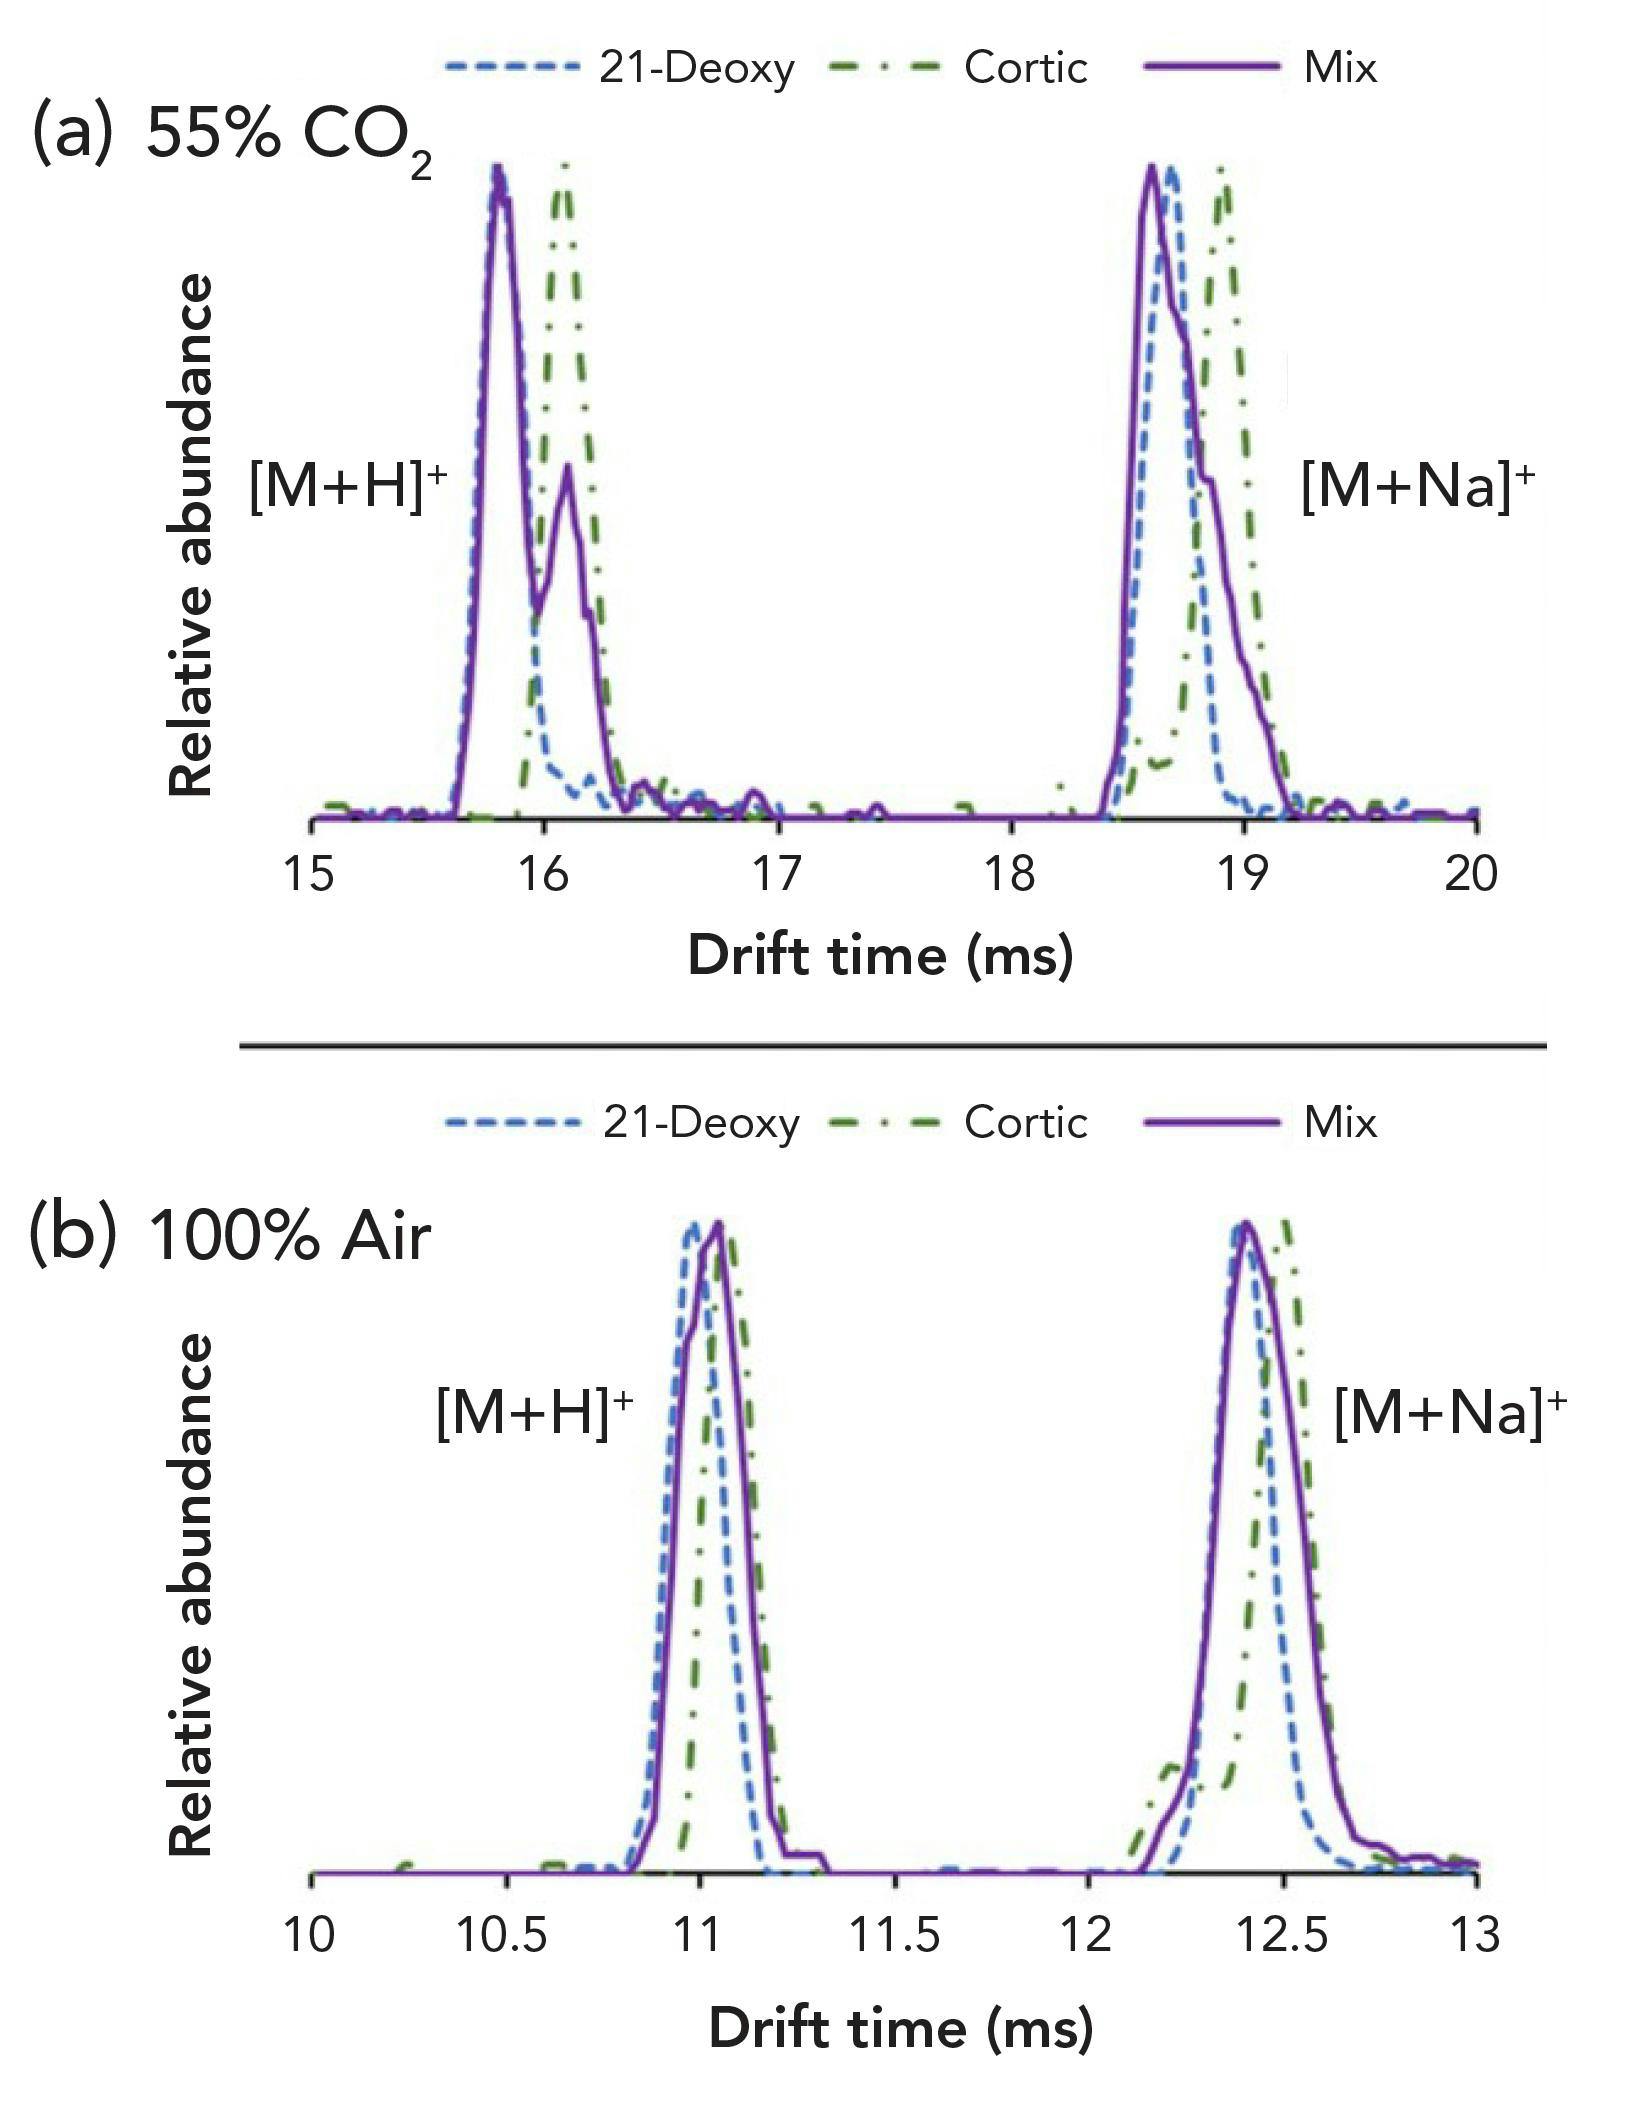 Figure 5: [M + H]+ (347.220 m/z) and [M + Na]+ (369.202 m/z) species for corticosterone and 21‐deoxycortisol in 55:45 CO2/air (a), showing significantly increased separation compared with 100% air (b). At 100% CO2, the separated peaks had merged again (not shown).